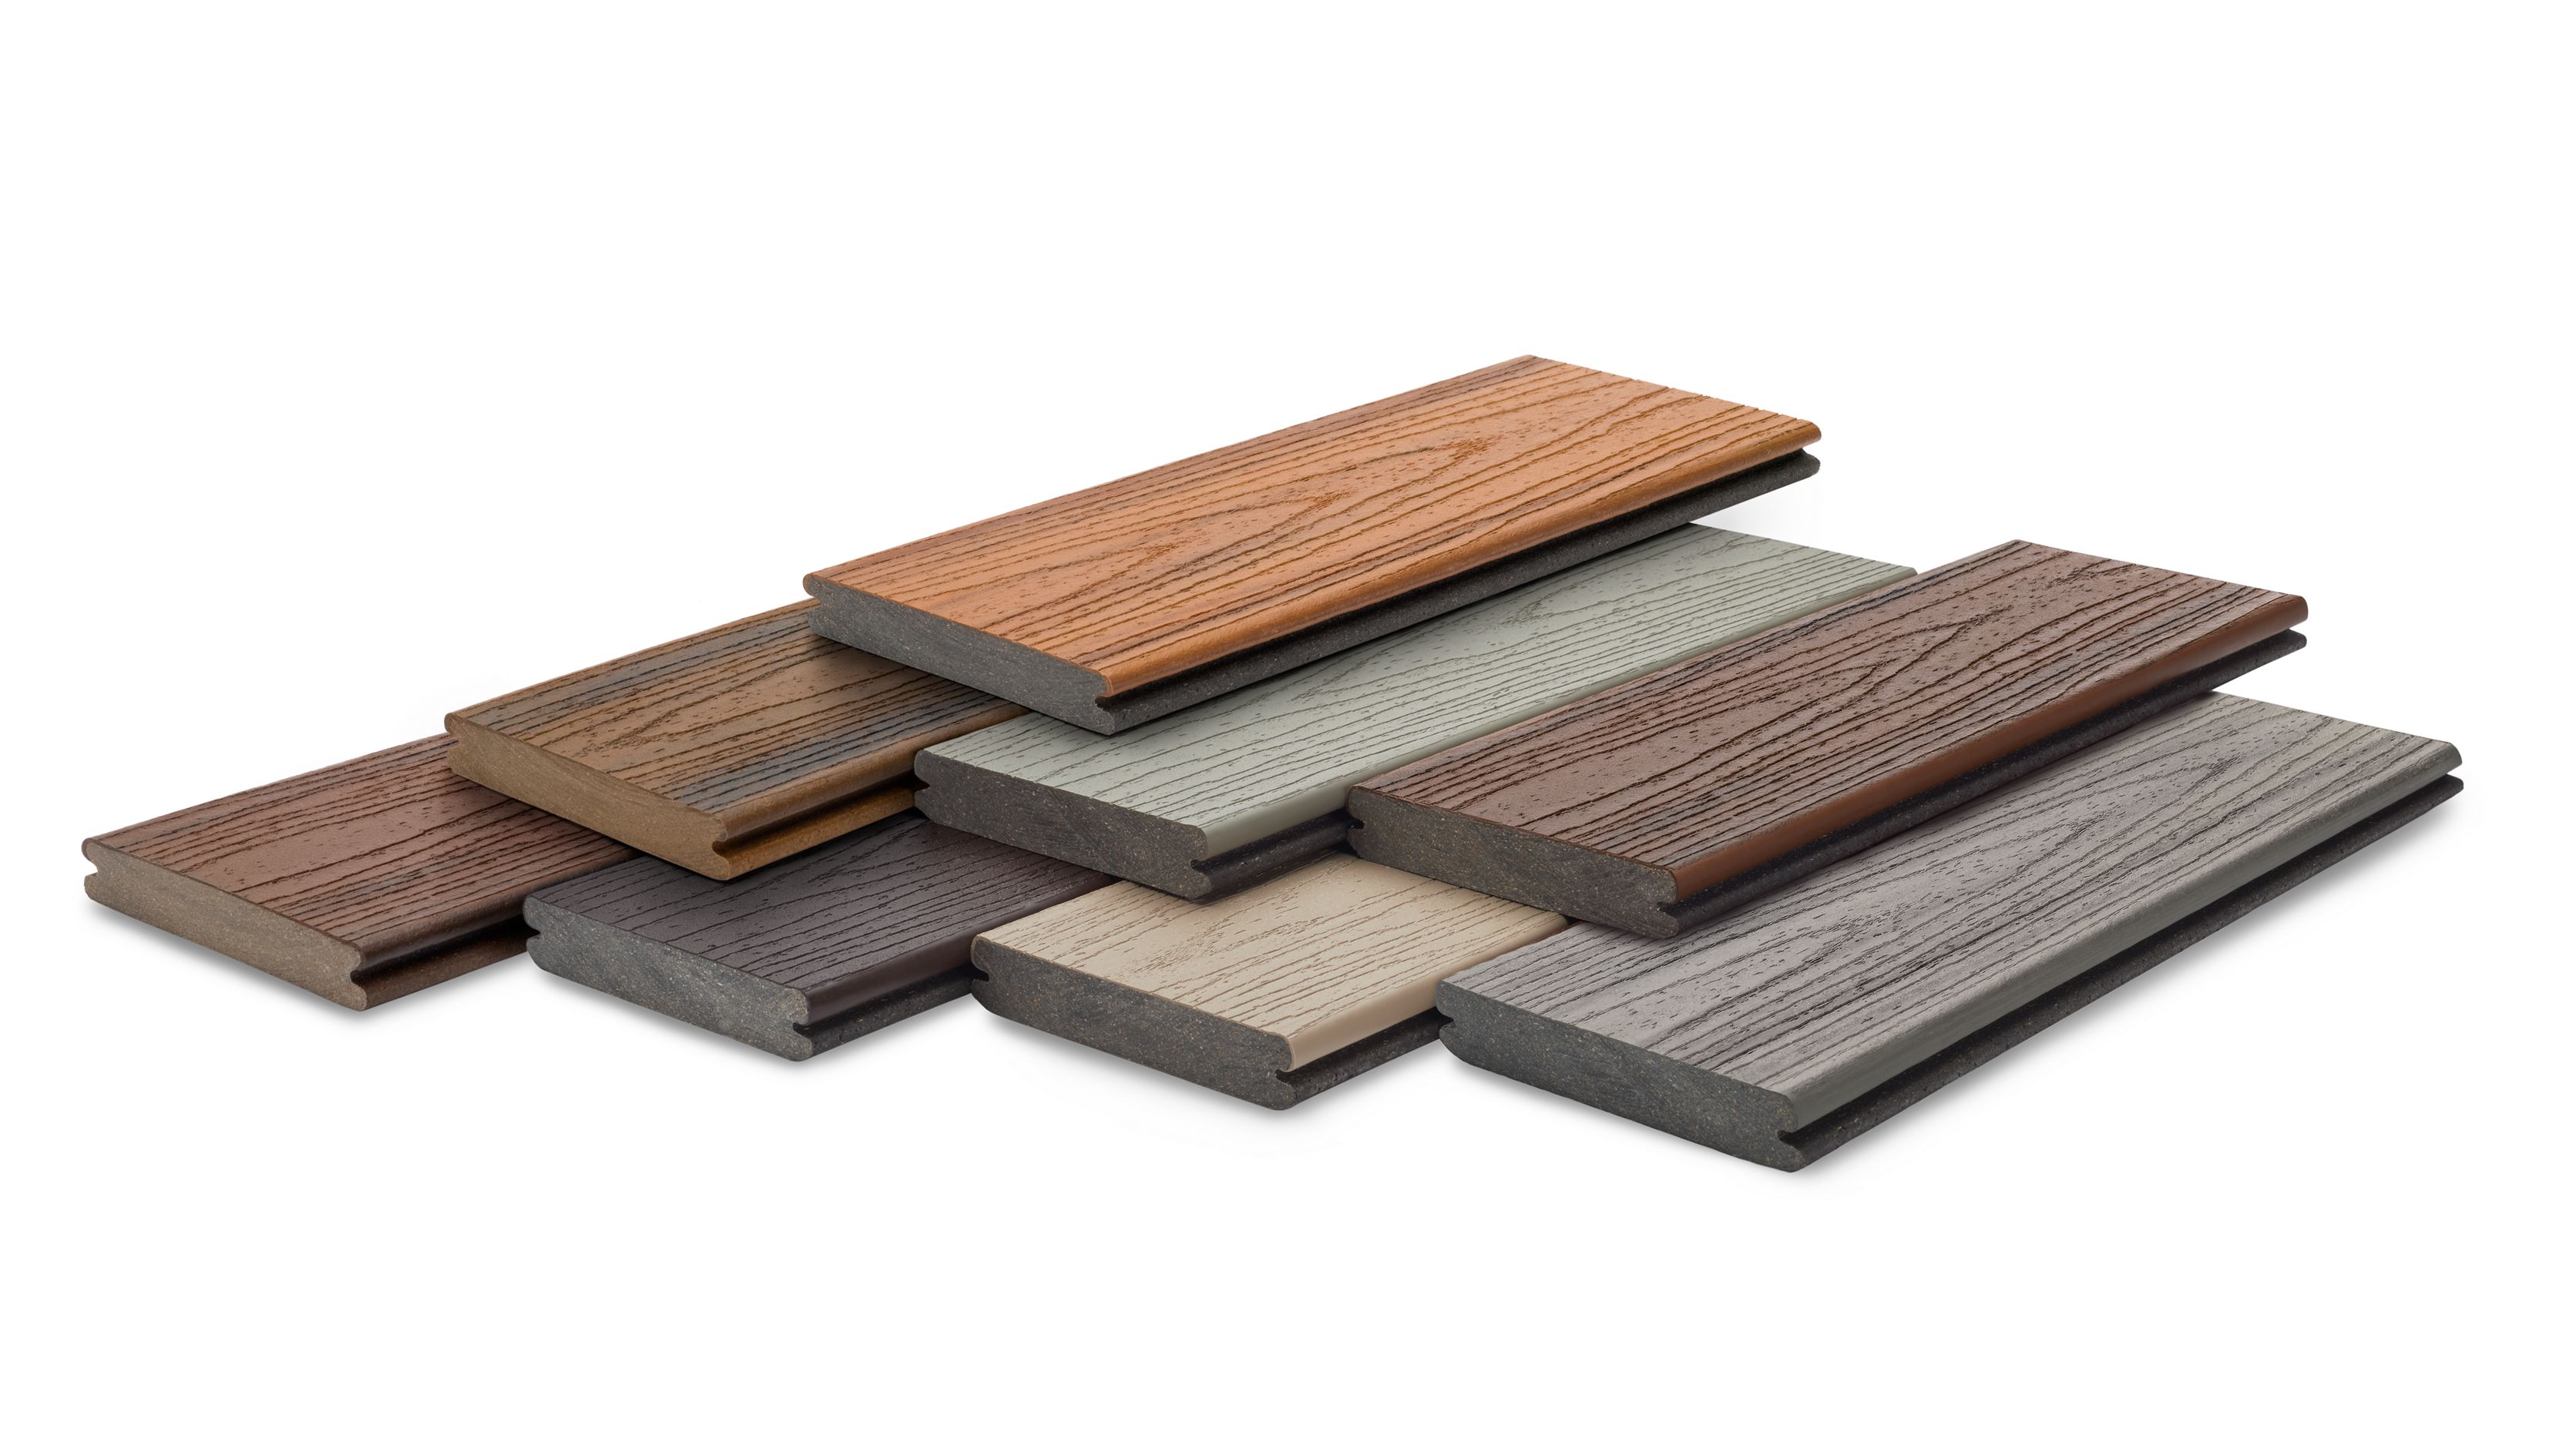 Real Wood or Composite Wood: Which Material Is Better for a Deck?